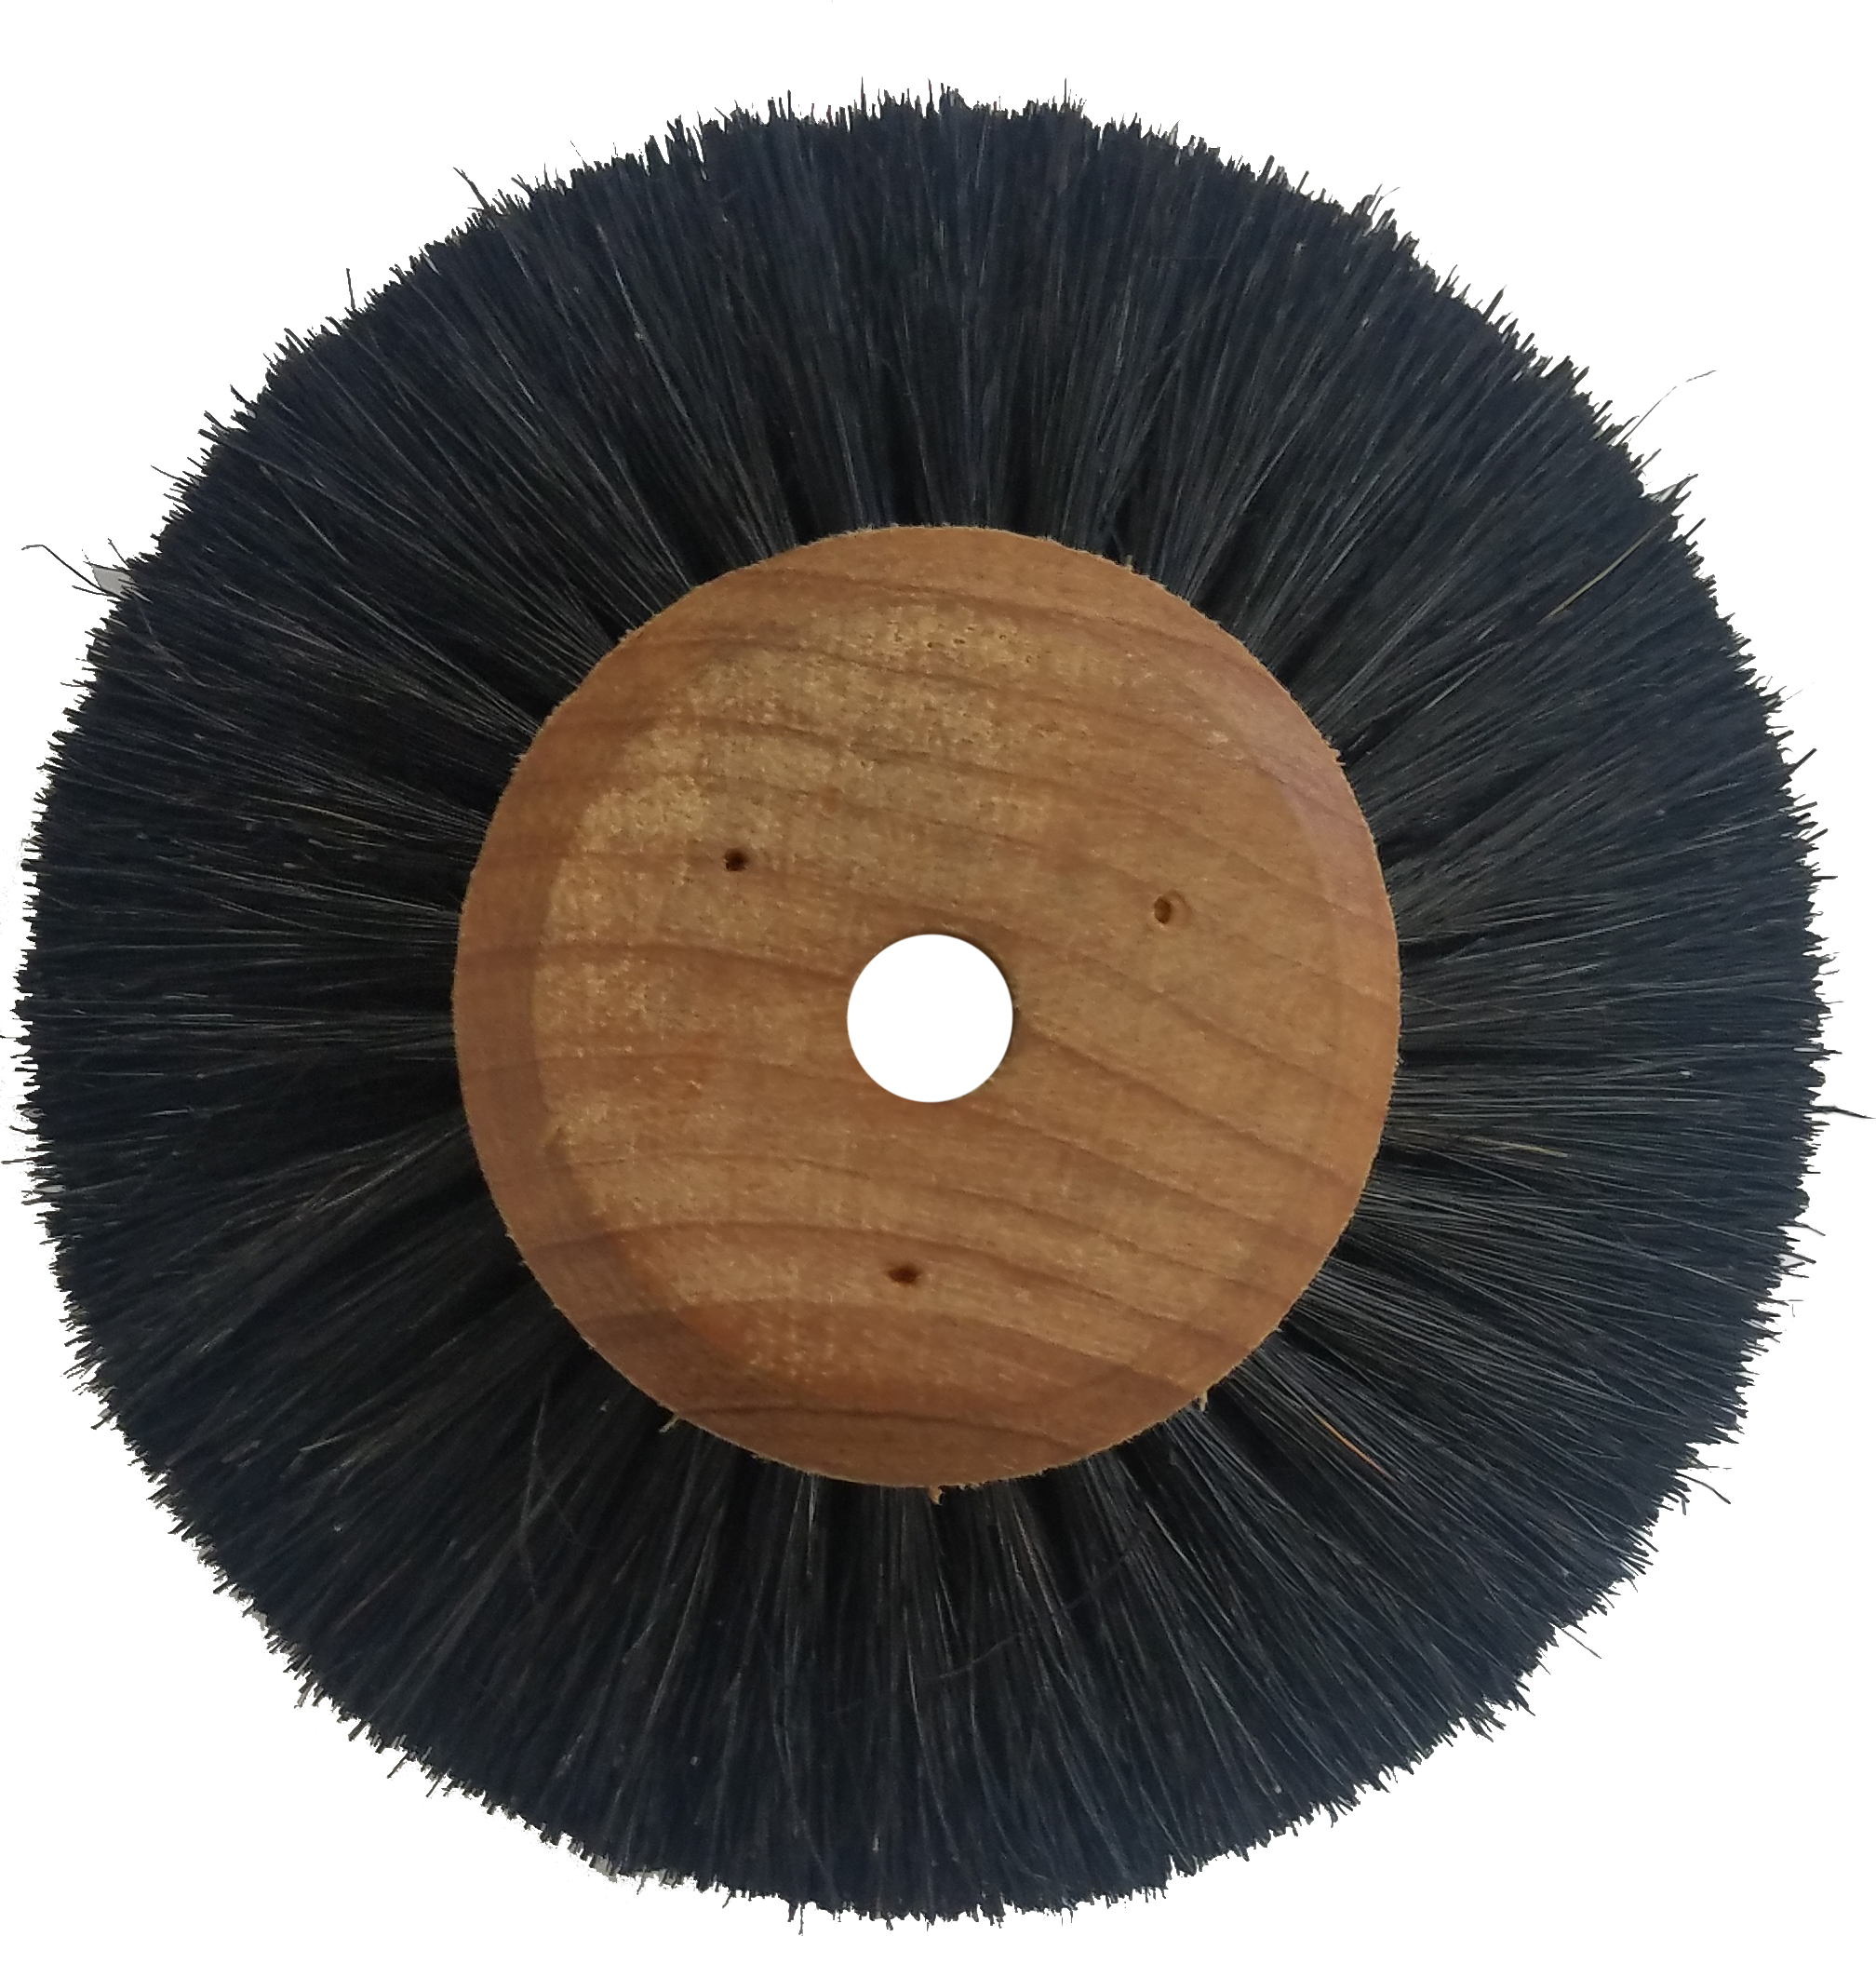 JSP GENUINE WOOD HUB CHUNG KING BRUSHES with CONVERGING BRISTLES - Click Image to Close